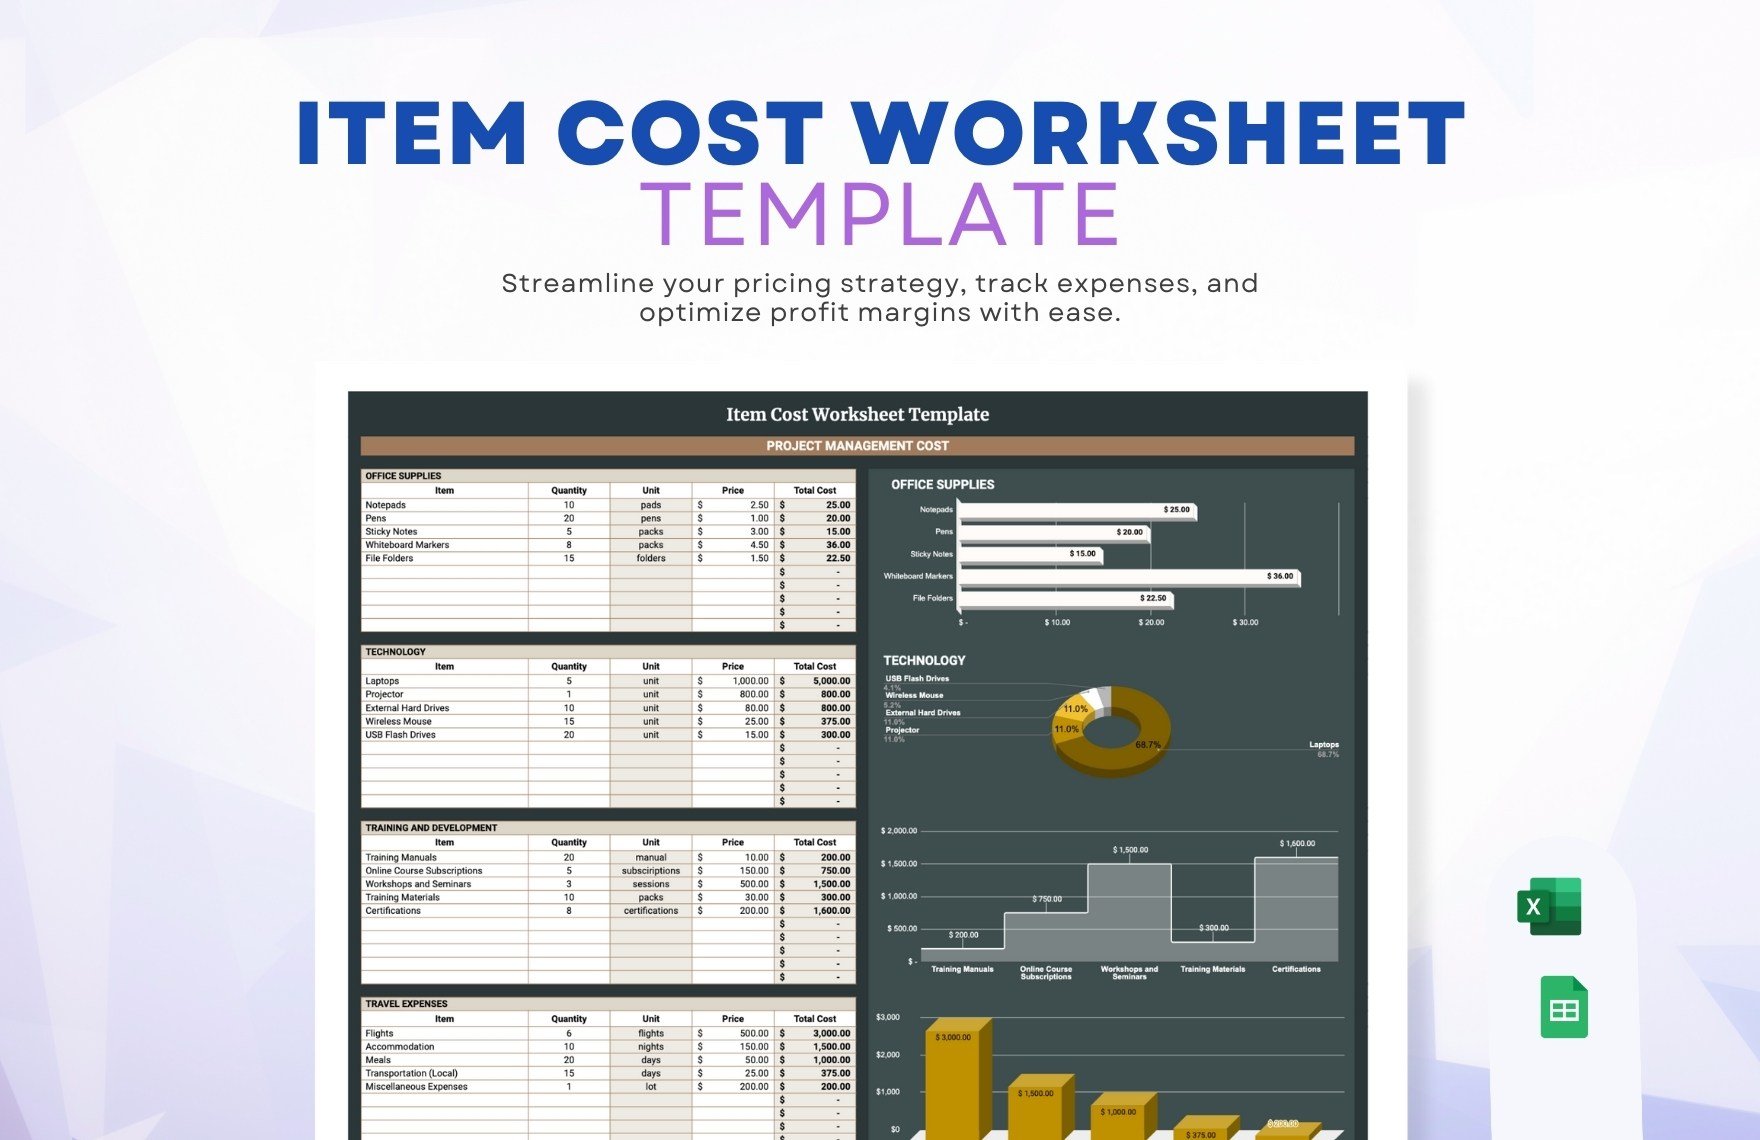 Free Item Cost Worksheet Template in Excel, Google Sheets